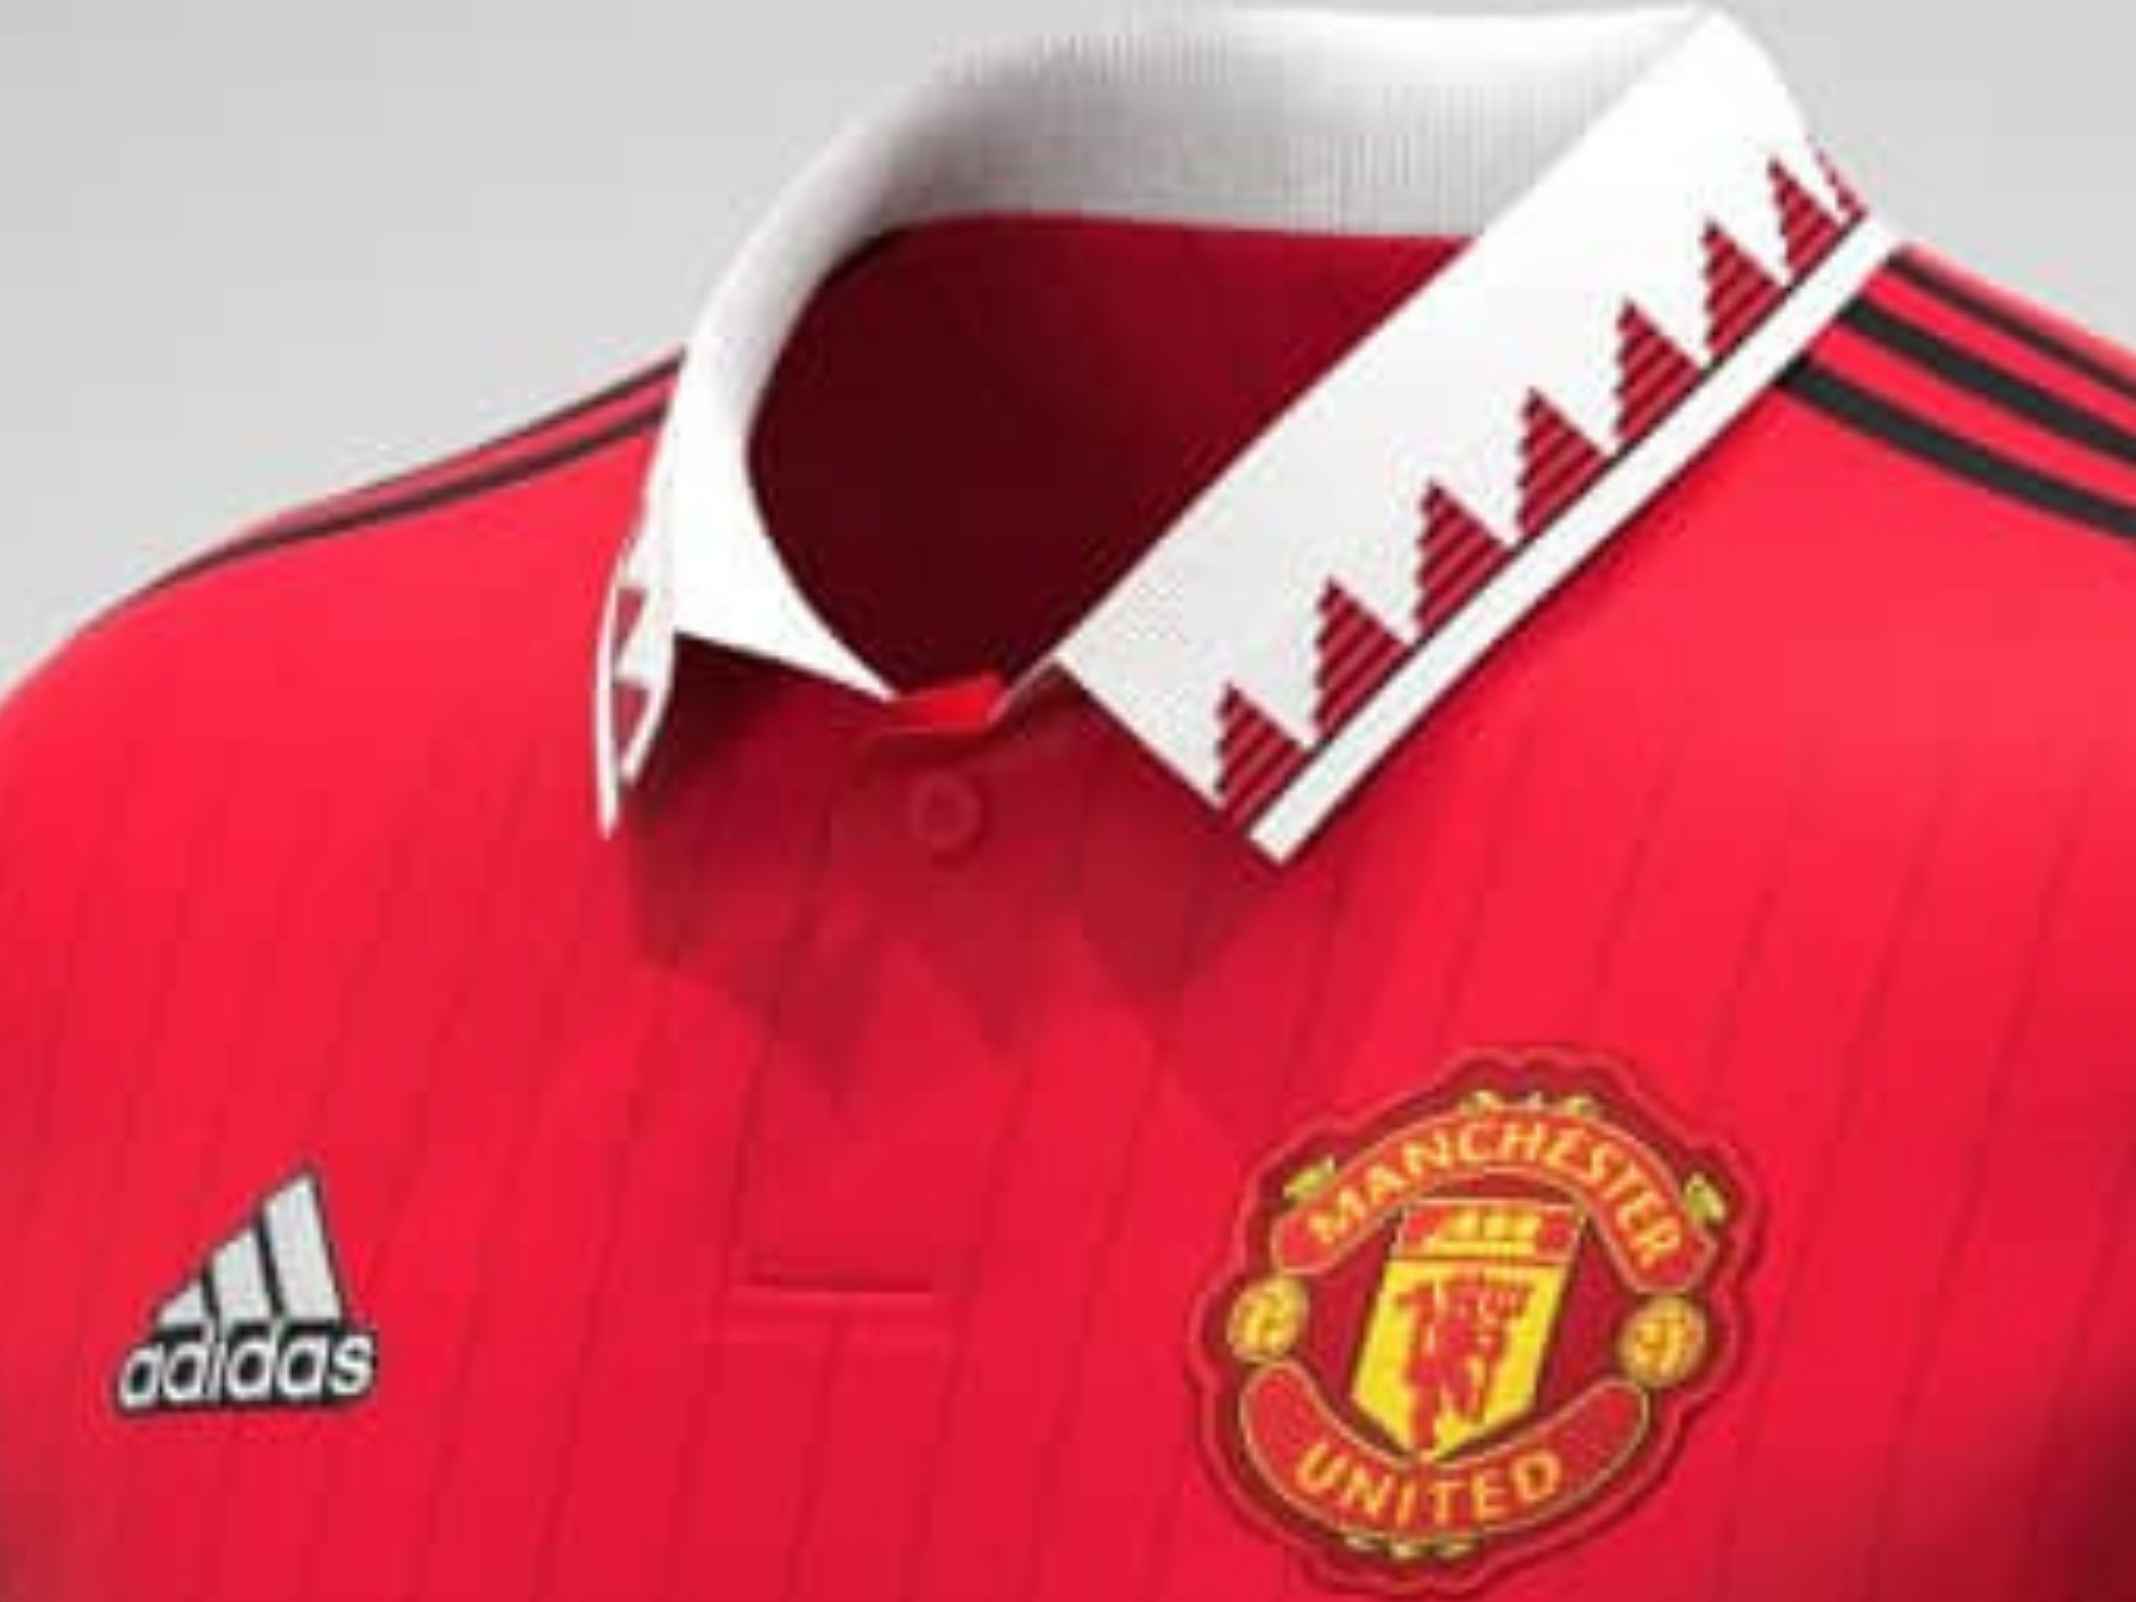 Leaked: Manchester United return to roots with retro home kit for 22/23 season